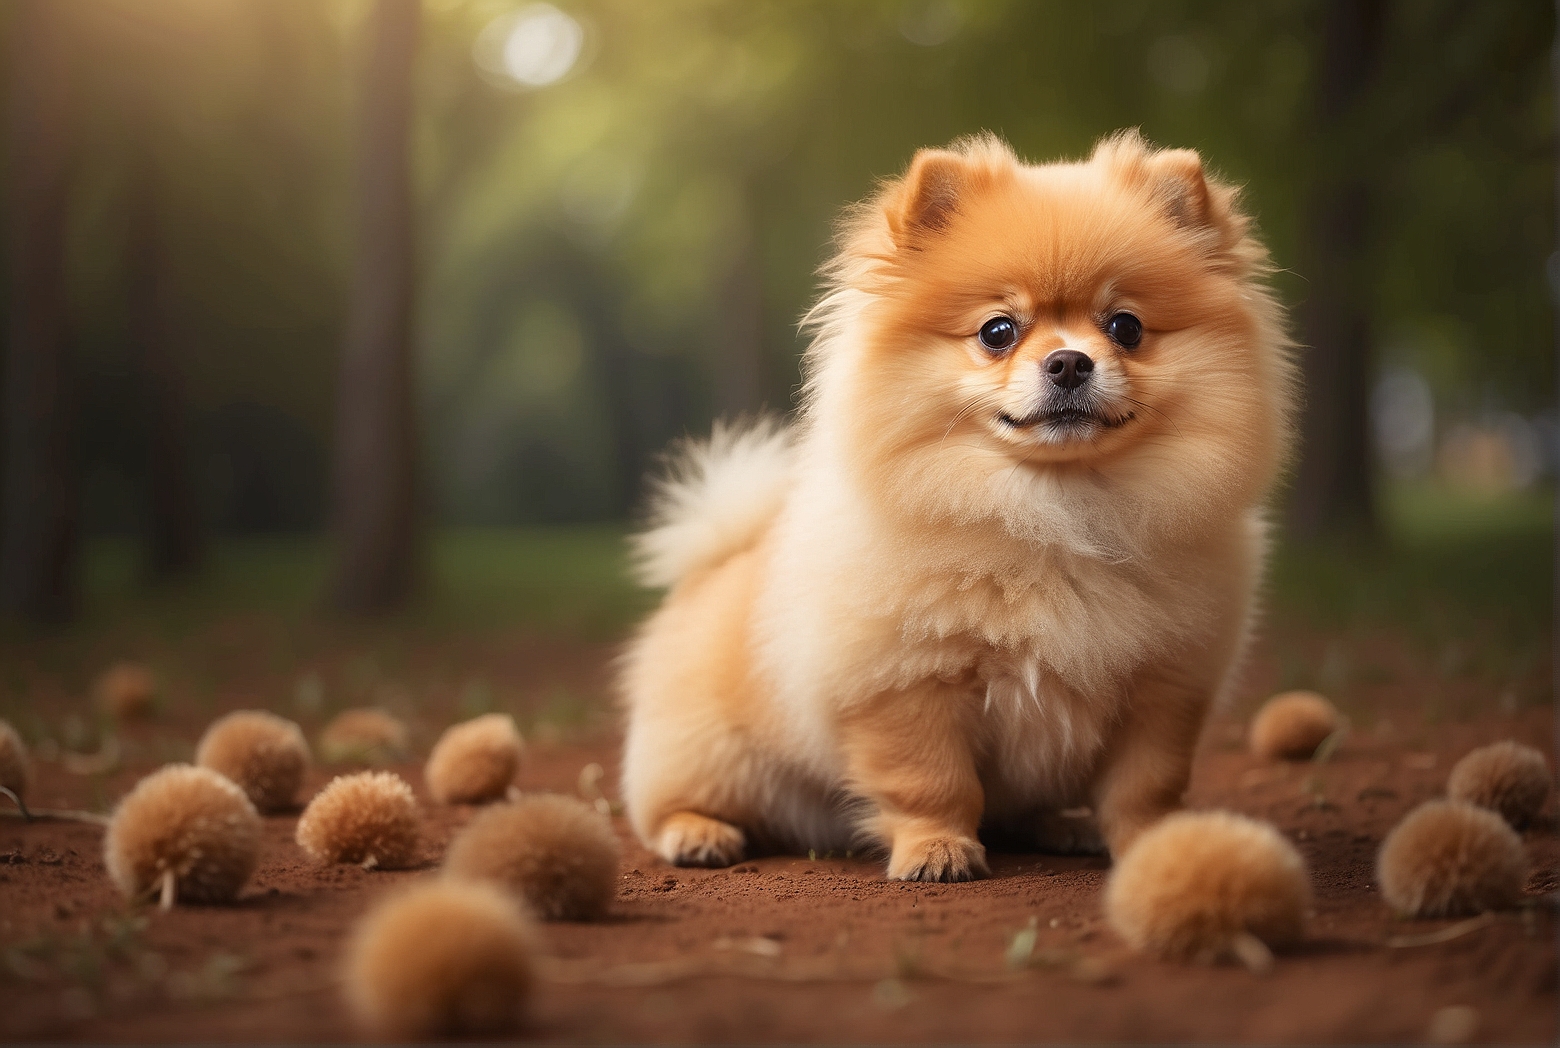 At what age do Pomeranians stop growing?